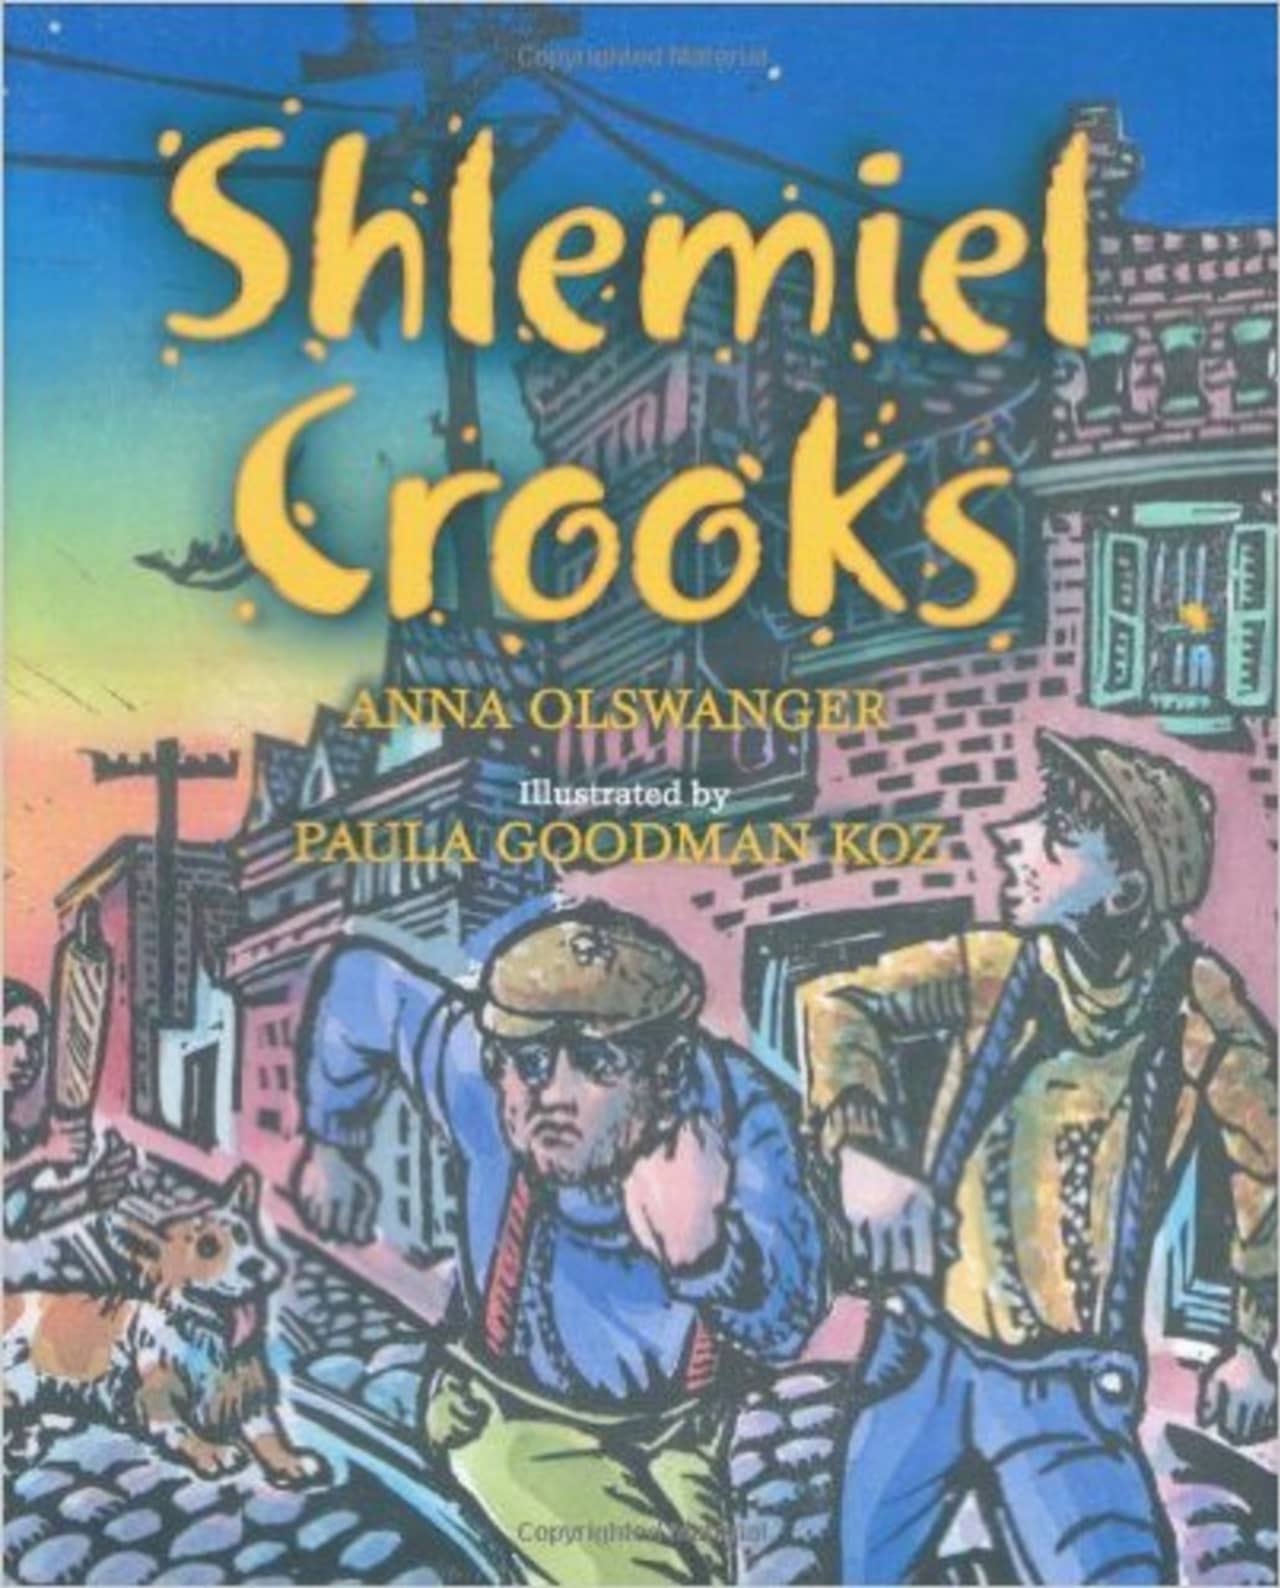 "Shlemiel Crooks!" is coming to the Old Library Theatre, in musical form.